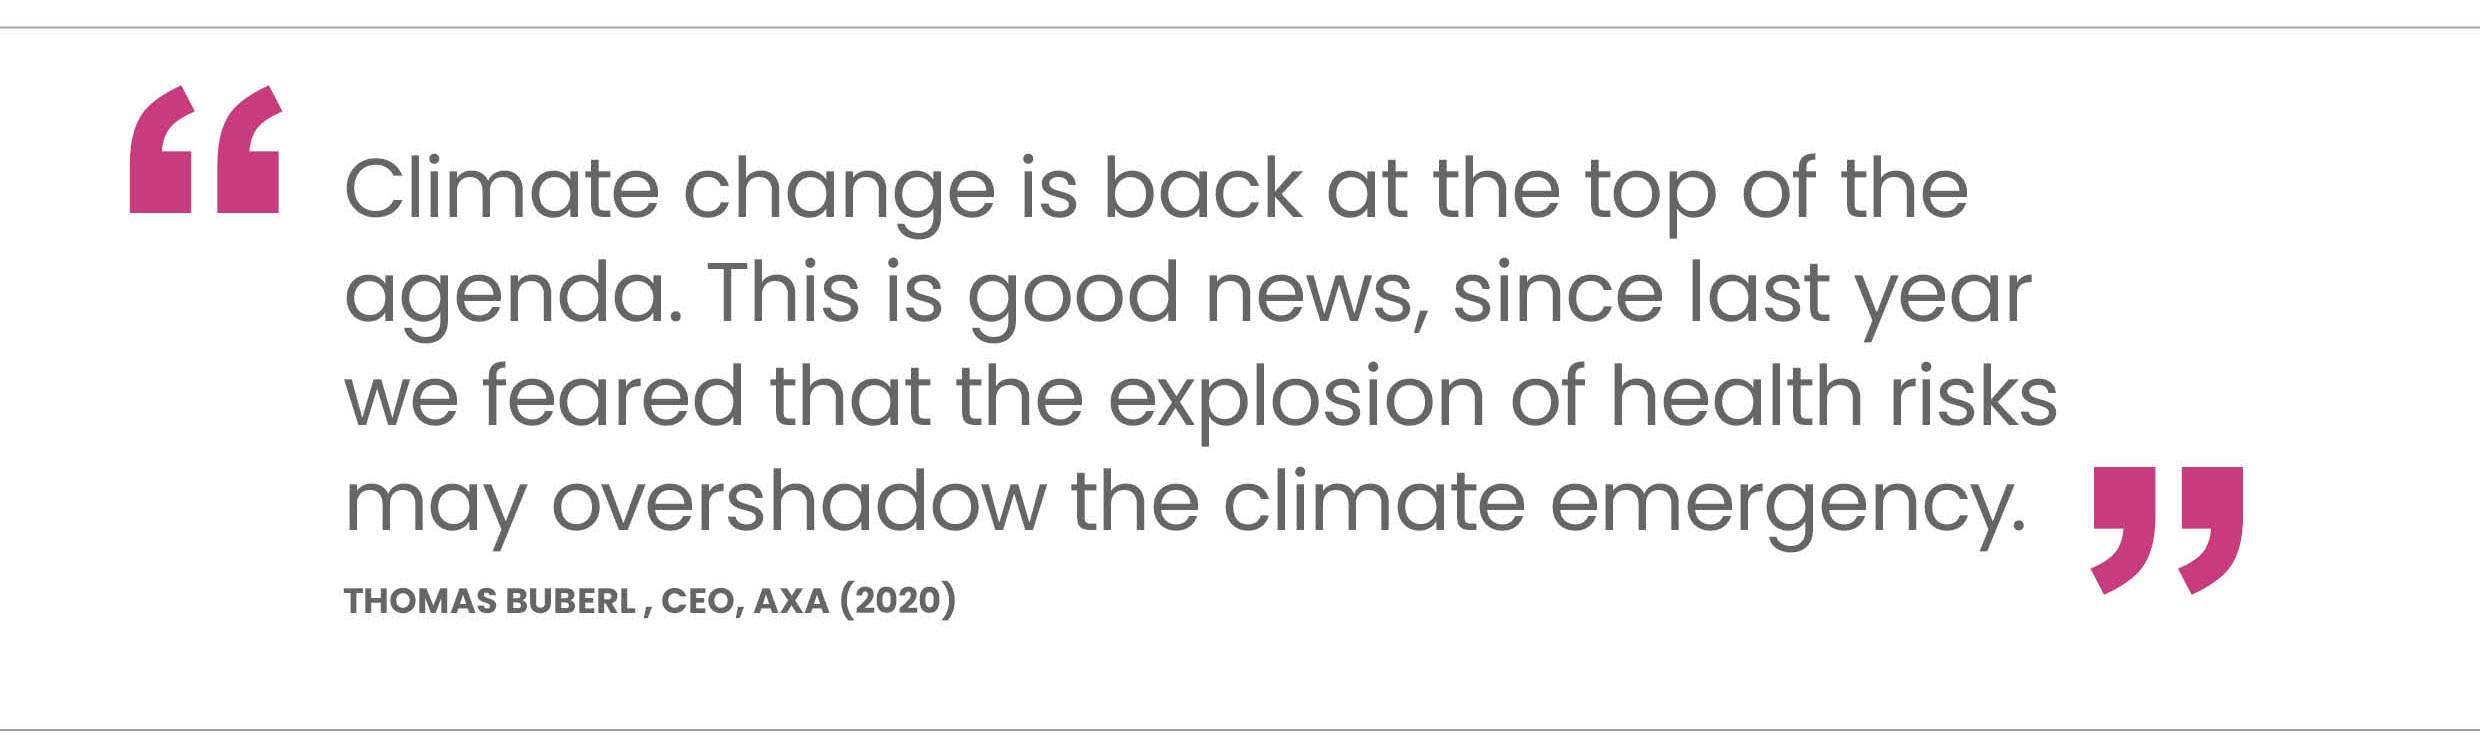 Article quote climate change